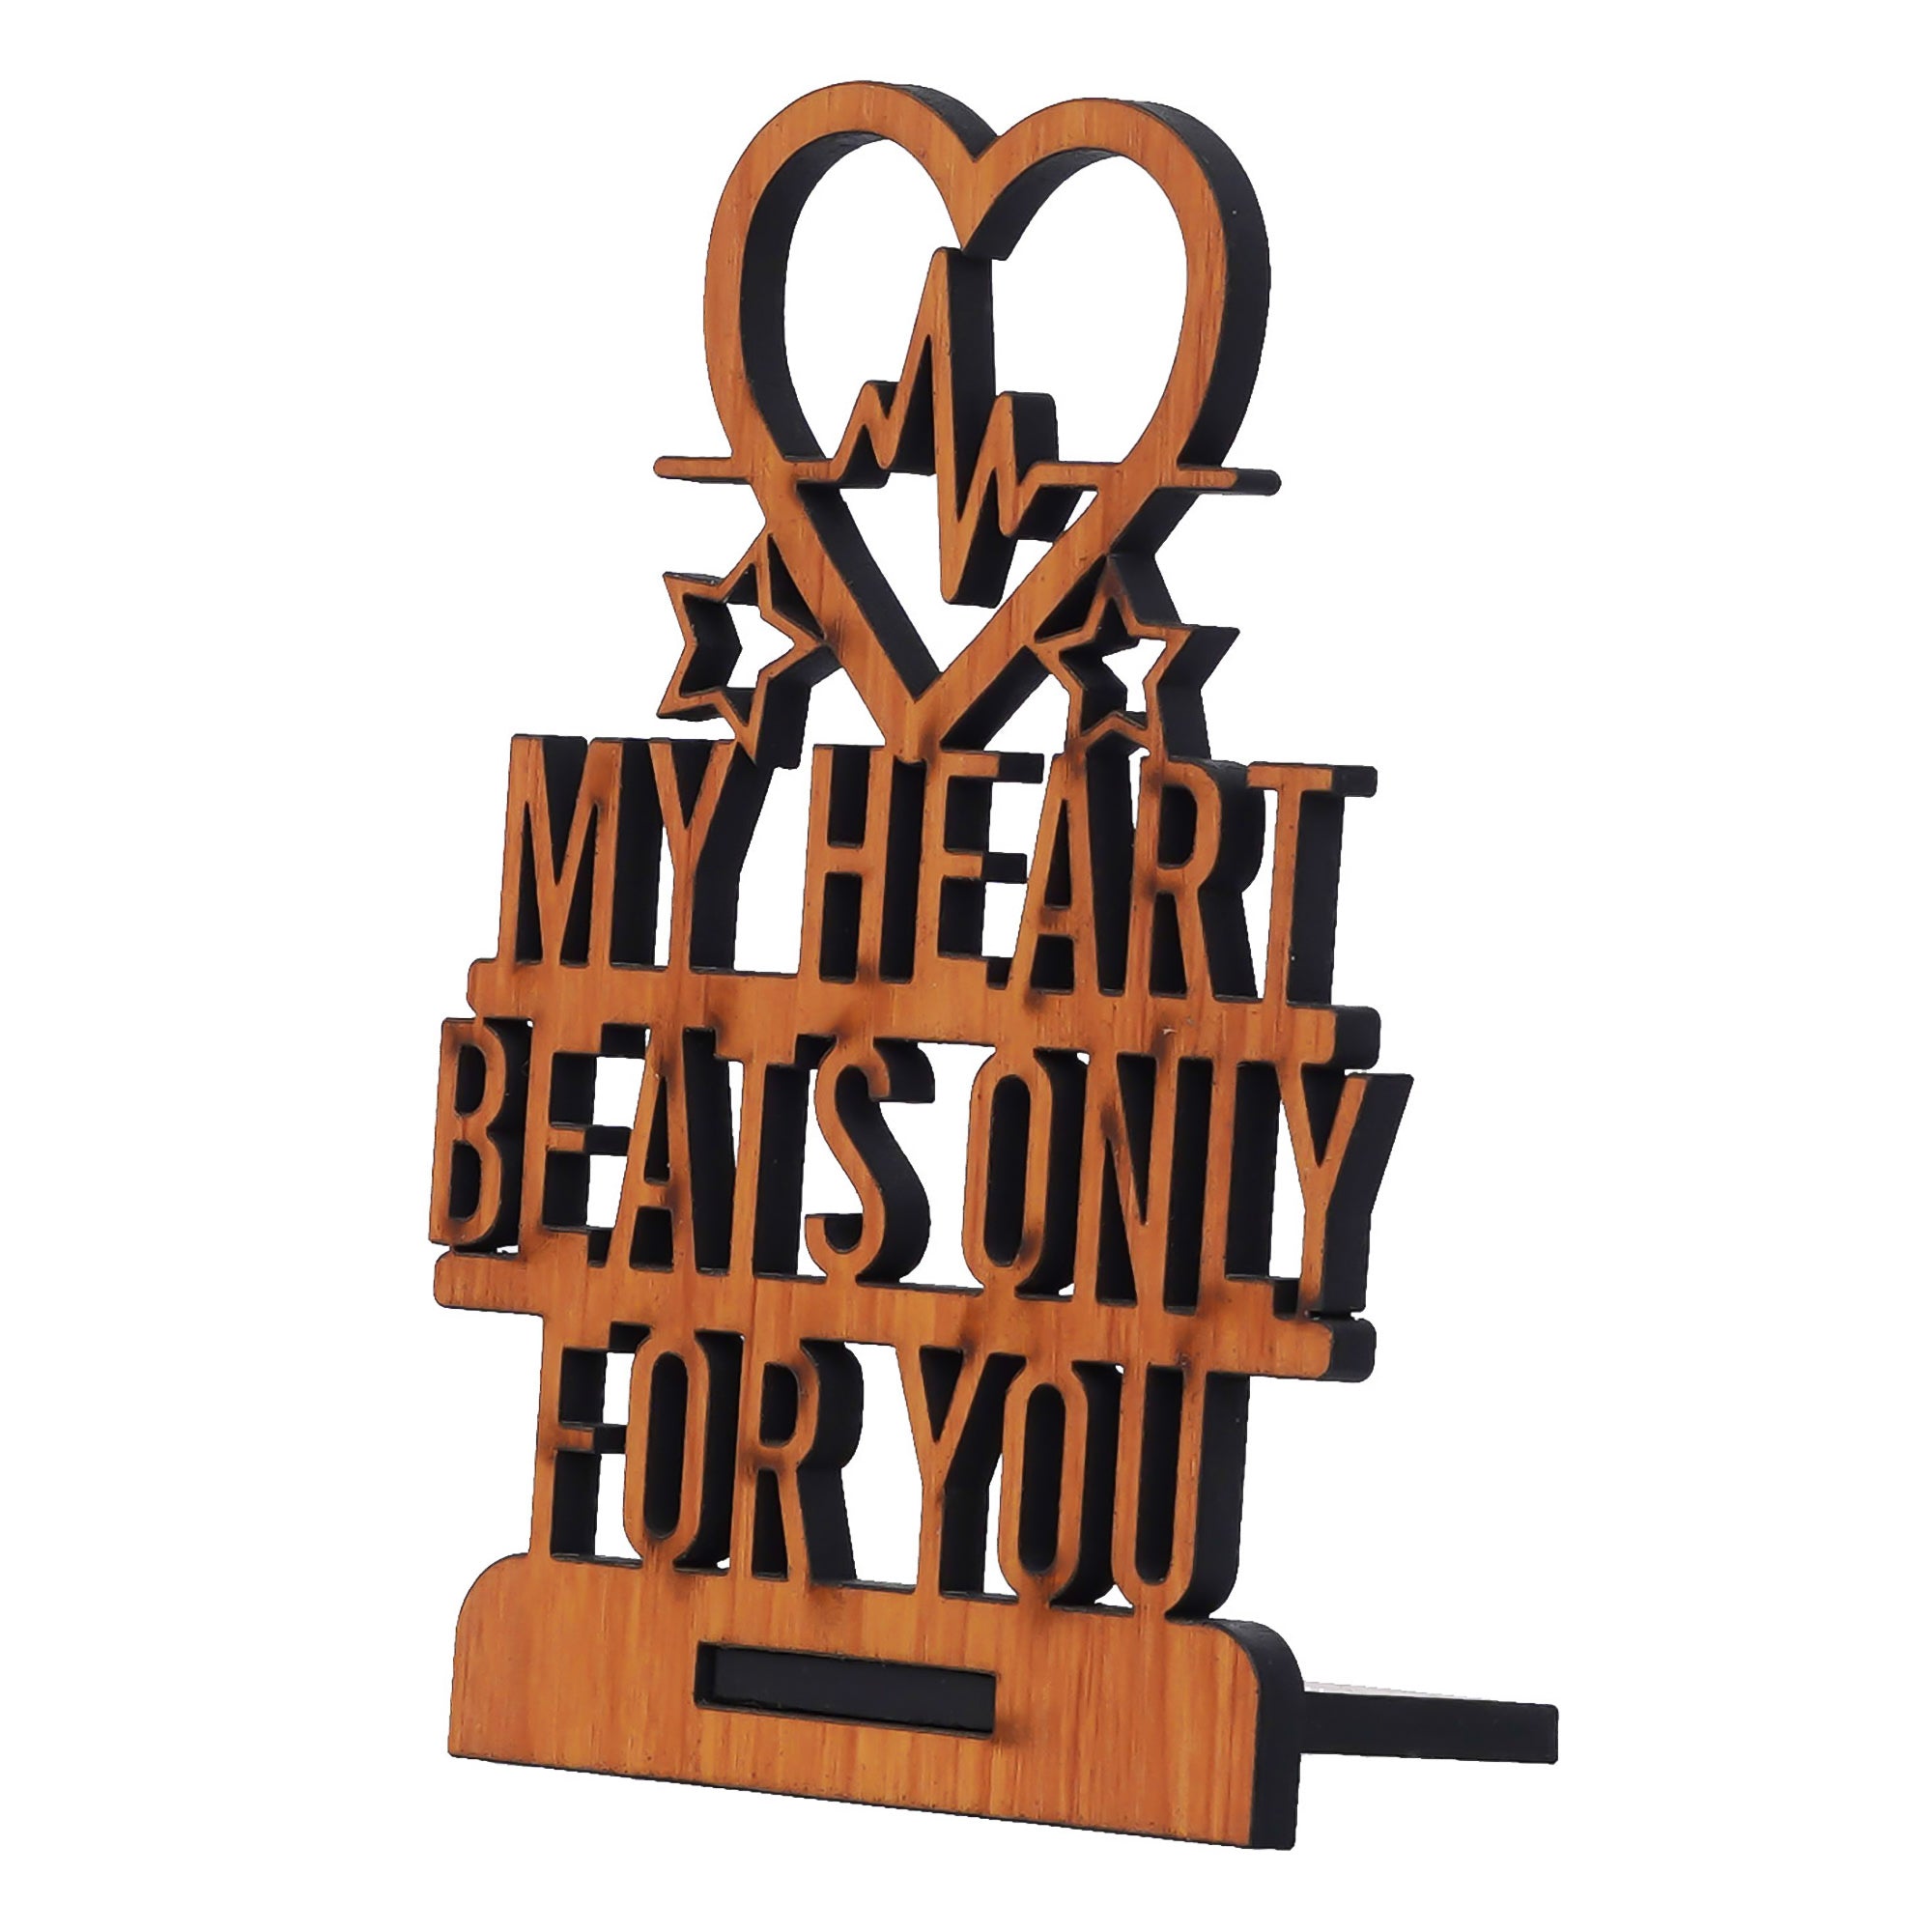 Valentine Combo of "My Heart Beats Only For You" Wooden Showpiece With Stand, Colorful Girl and Boy "Sweet I Love You" Kissing Figurine 7